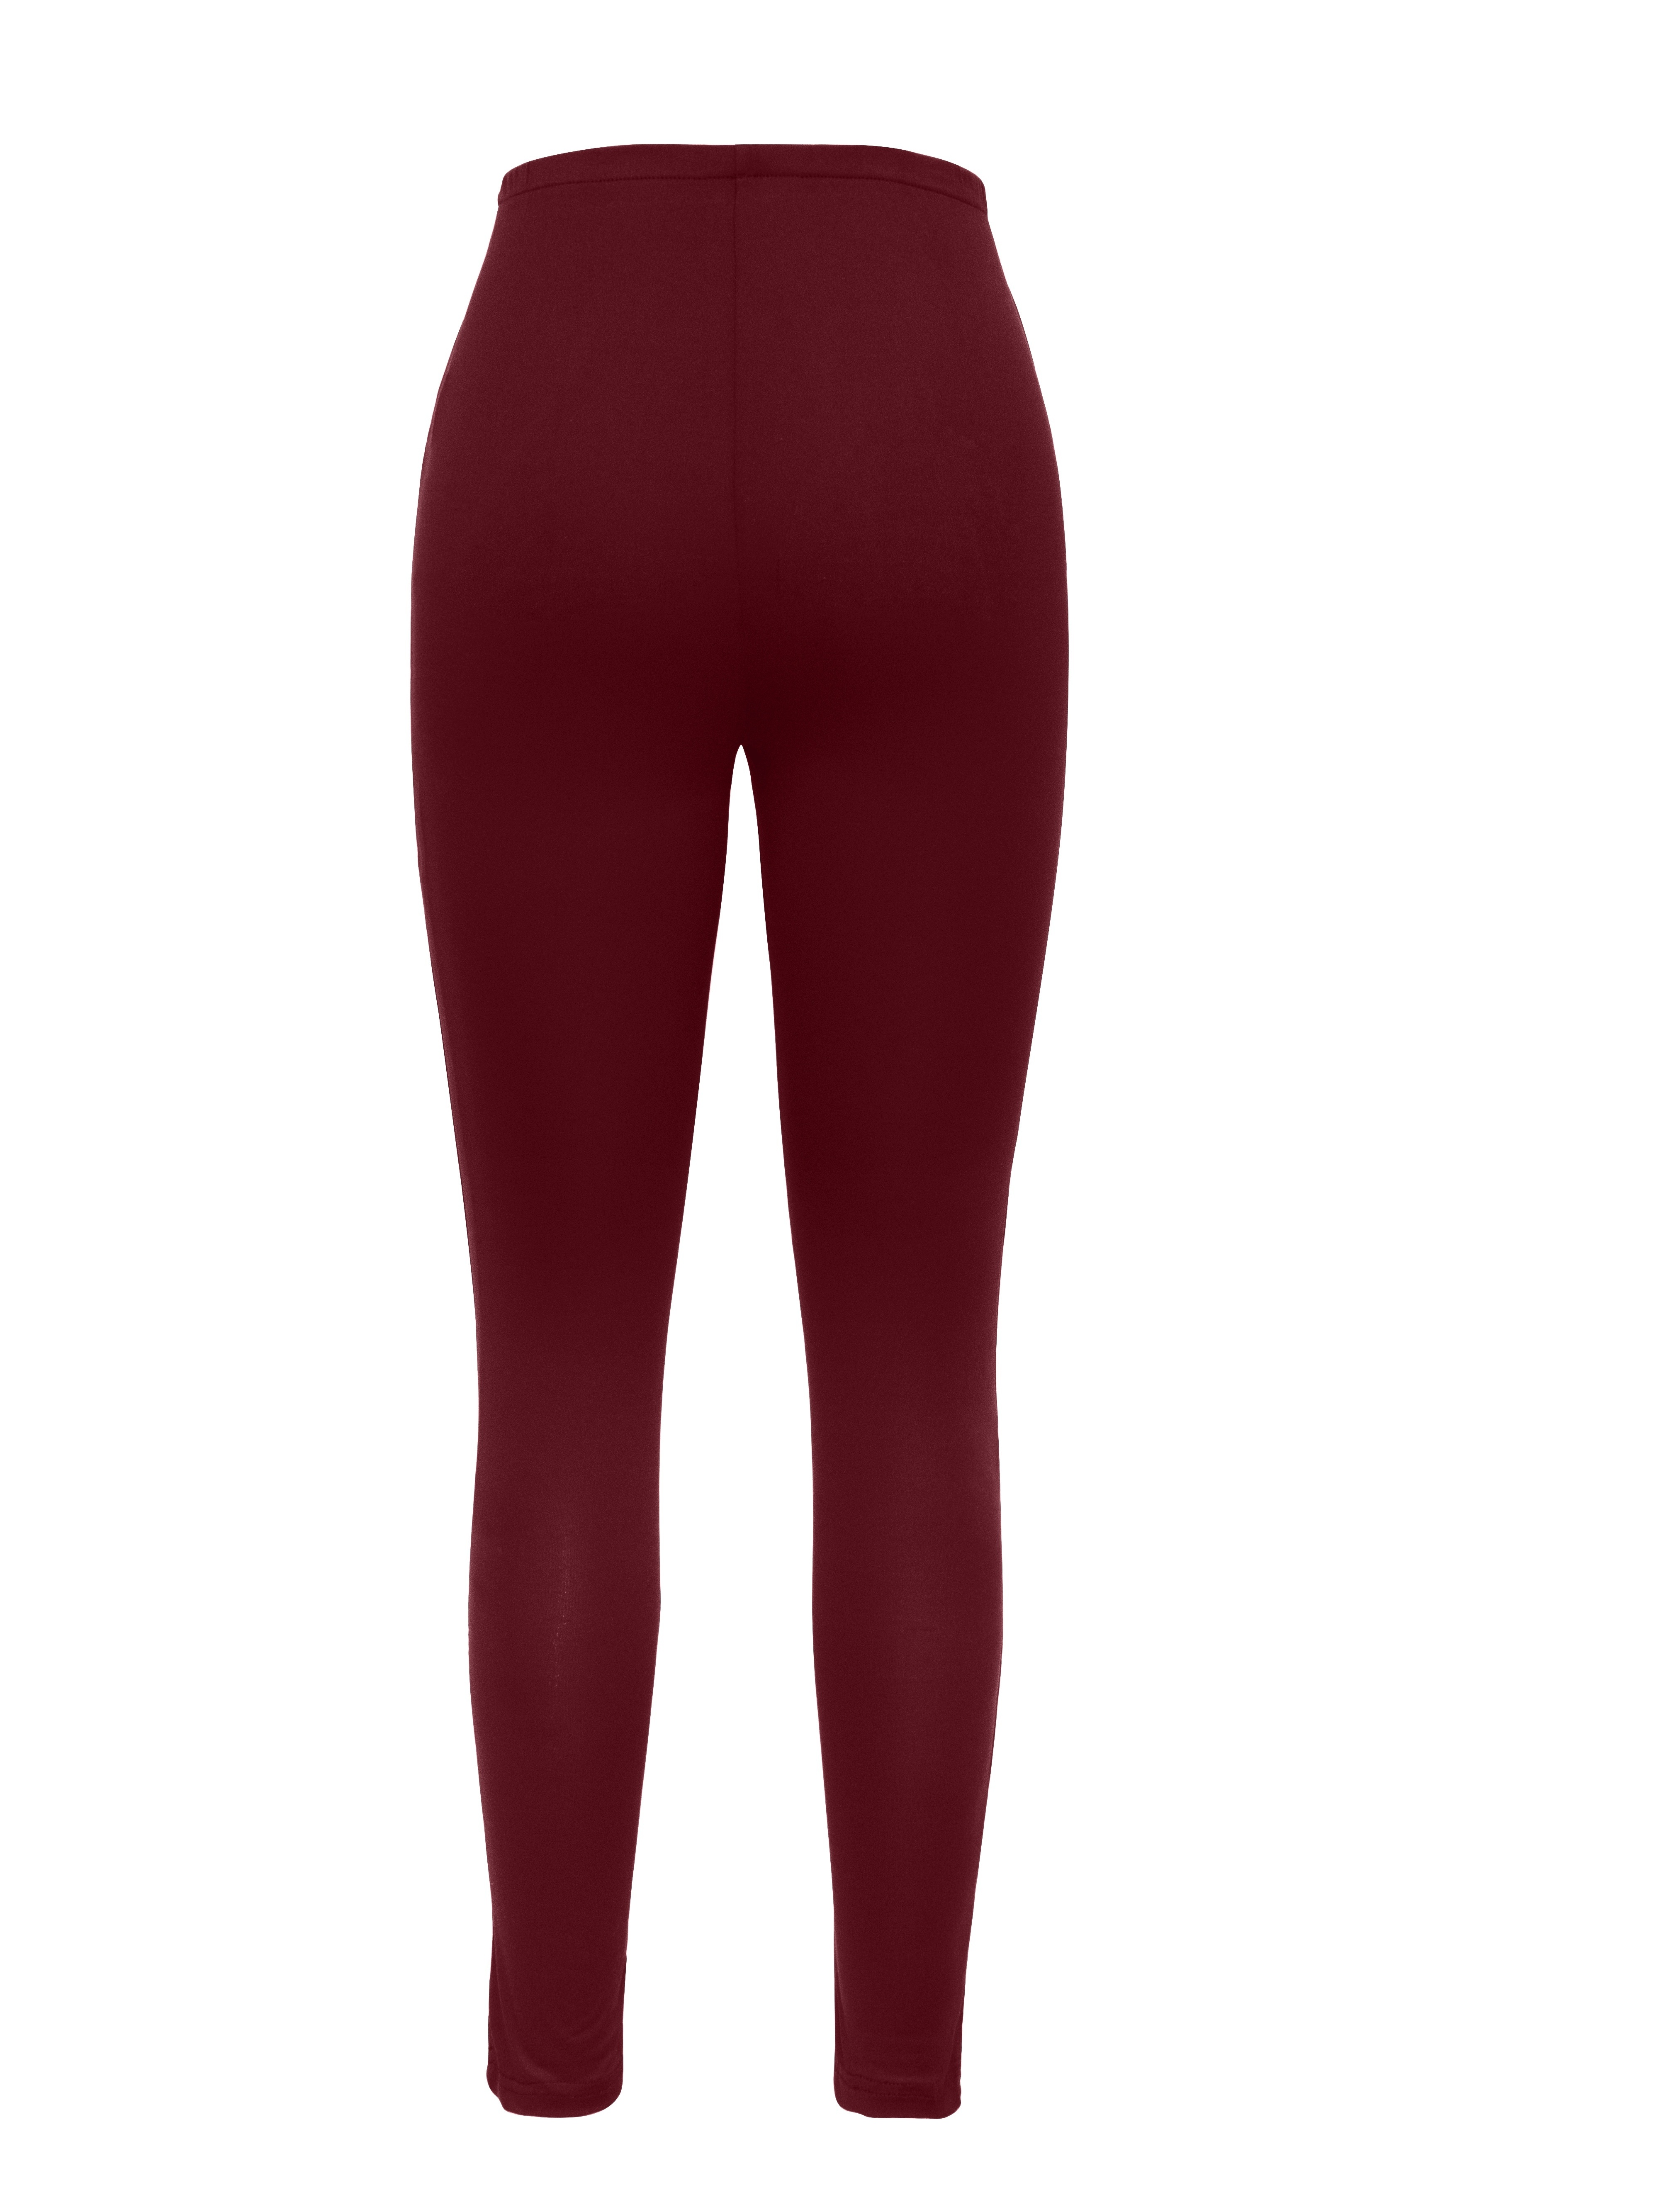 Womens Trousers, Ladies Rose Red High Waist Trousers Double